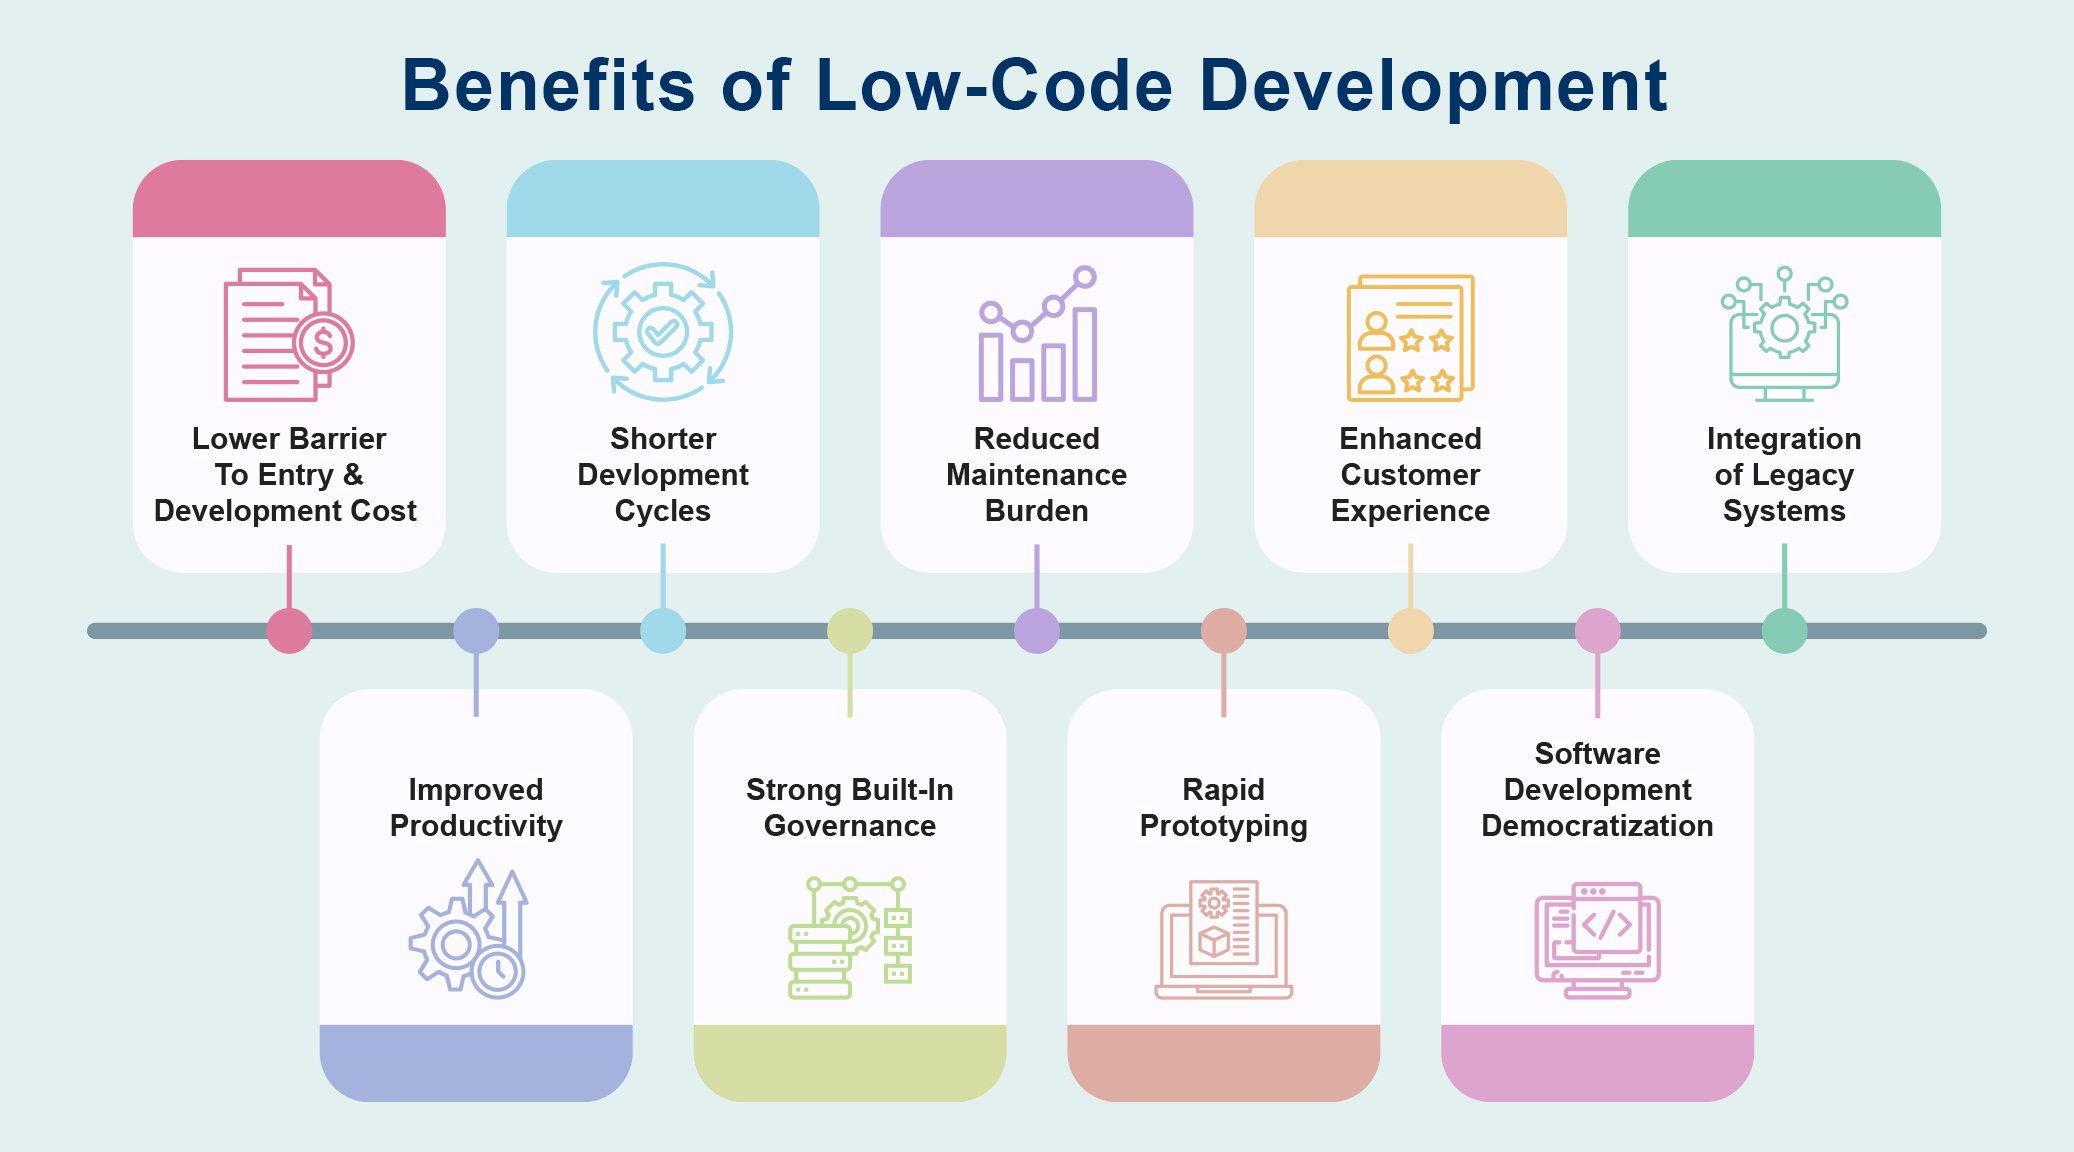 Benefits of low-code platform for insurance companies